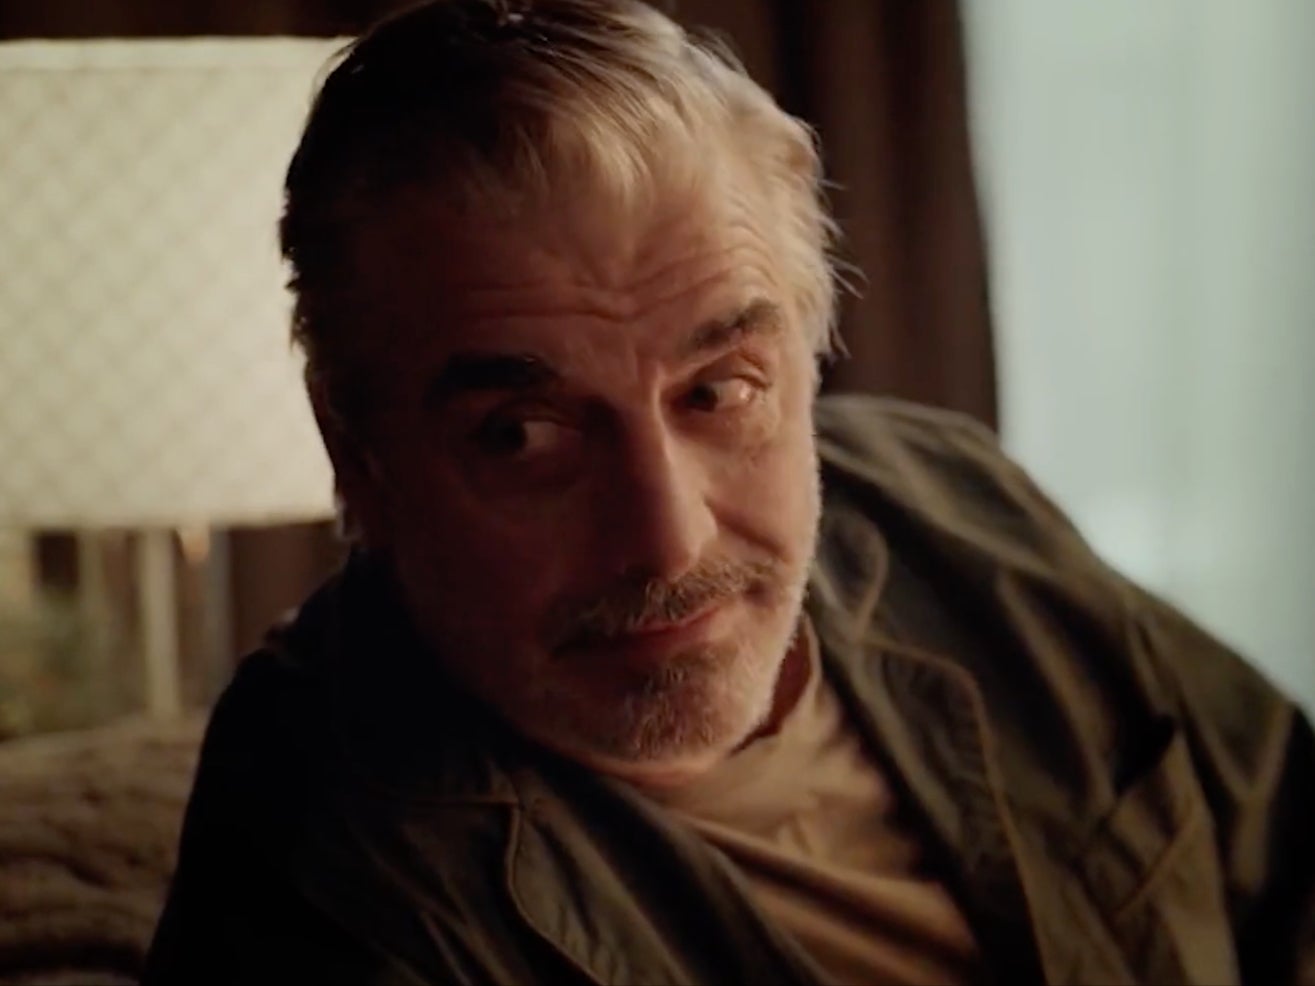 Peloton removes ad featuring Chris Noth amid sexual assault allegations